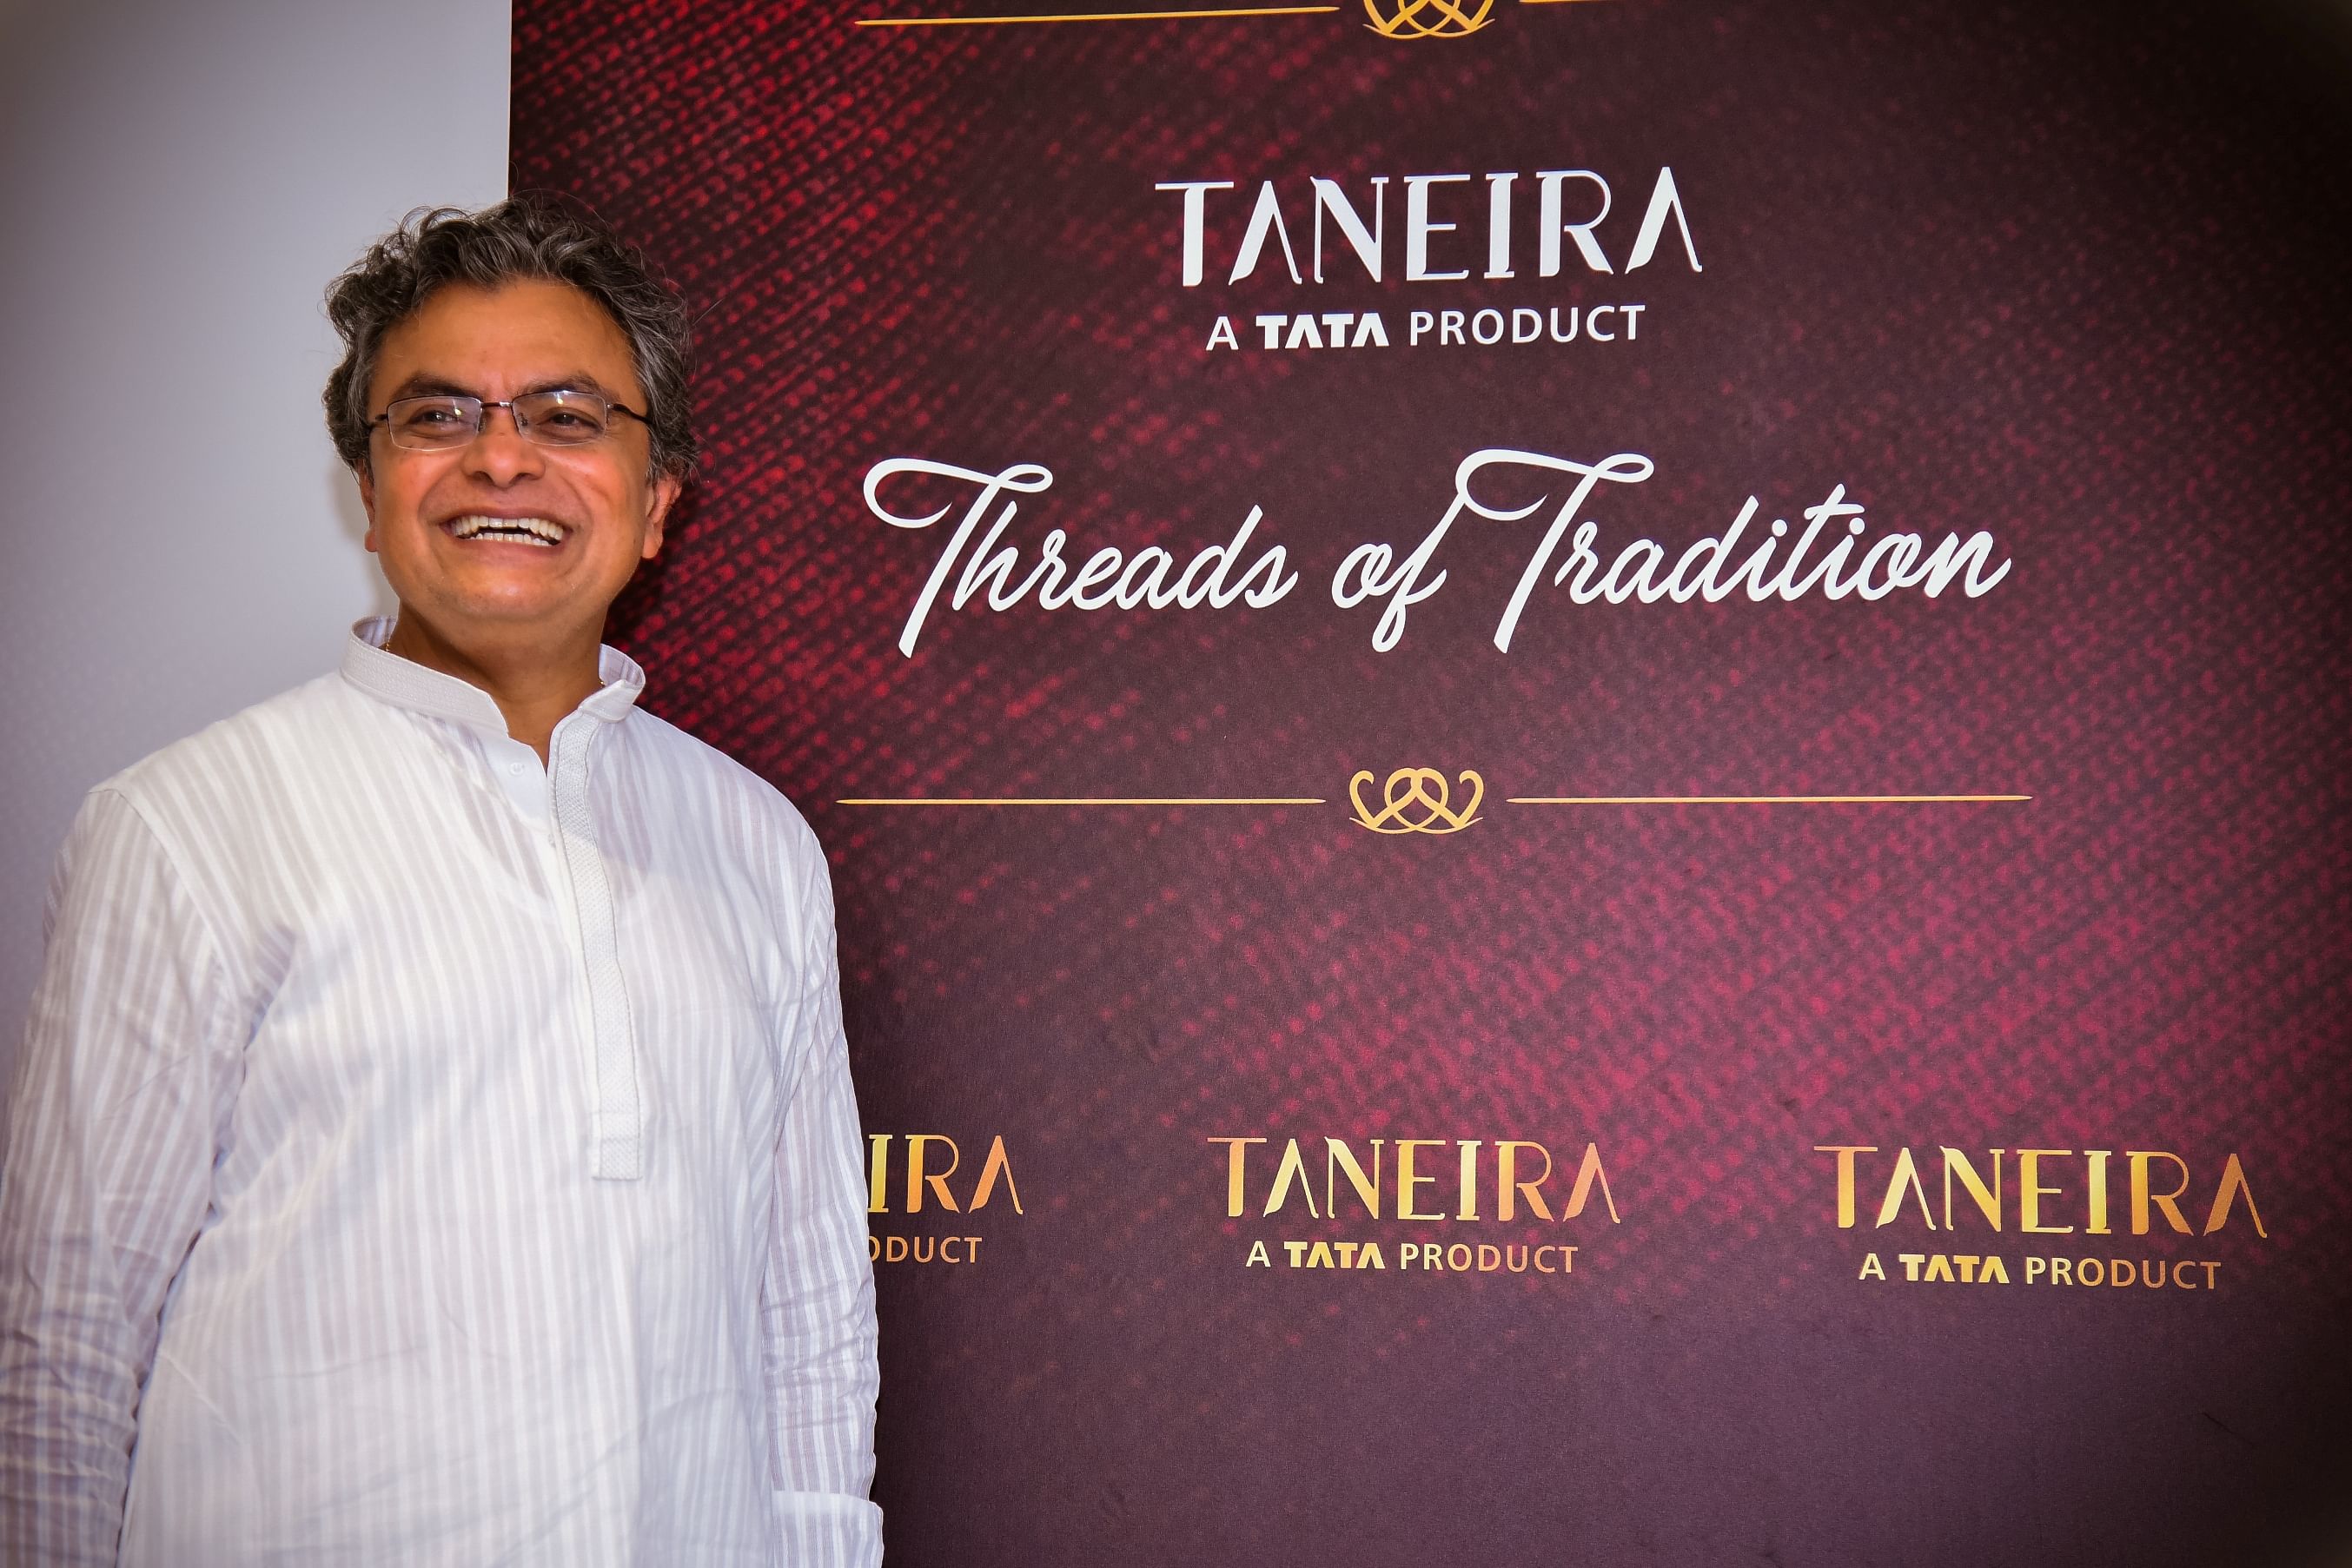 Saiful Islam at the event hosted by Taneira.